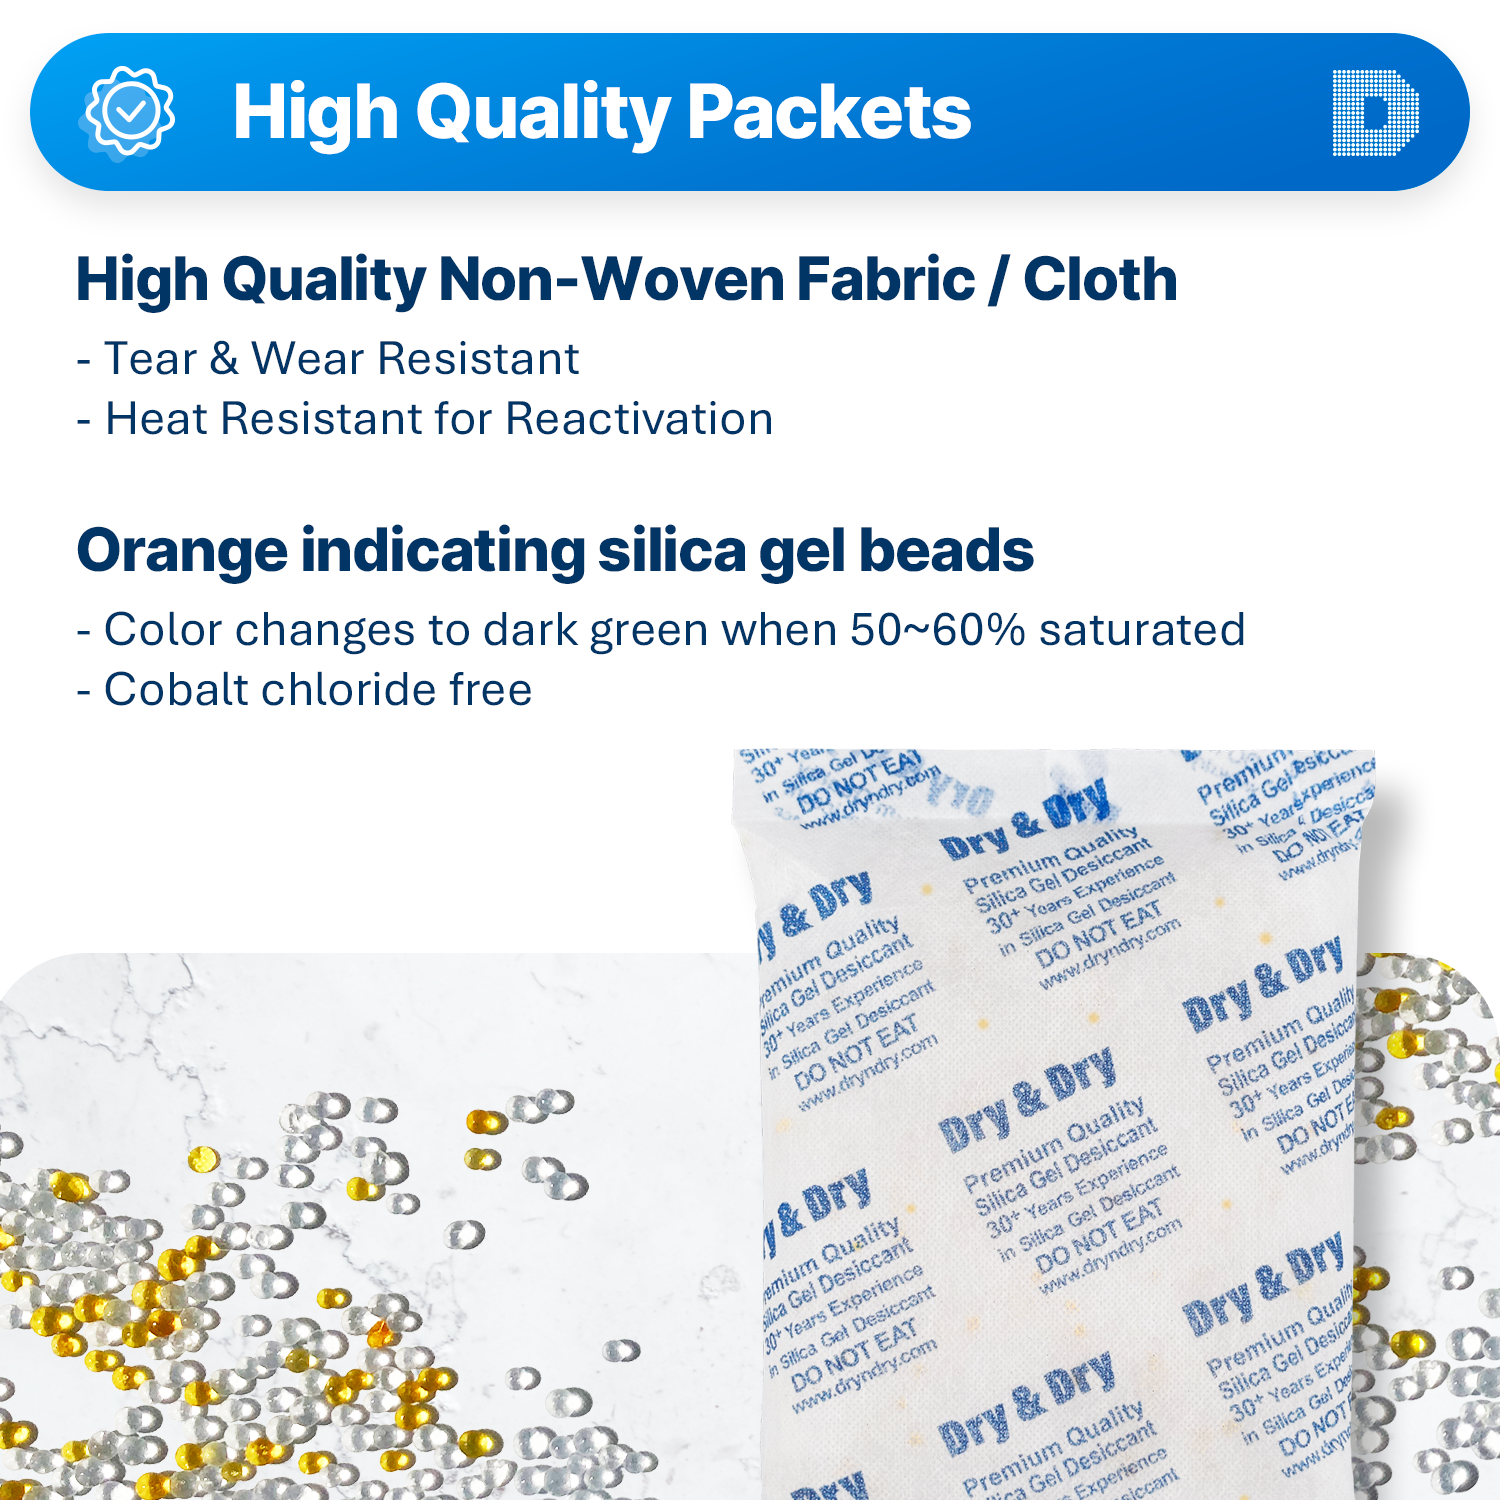 500 Gram Non-Woven Fabric (Cloth) Orange Indicating Packets